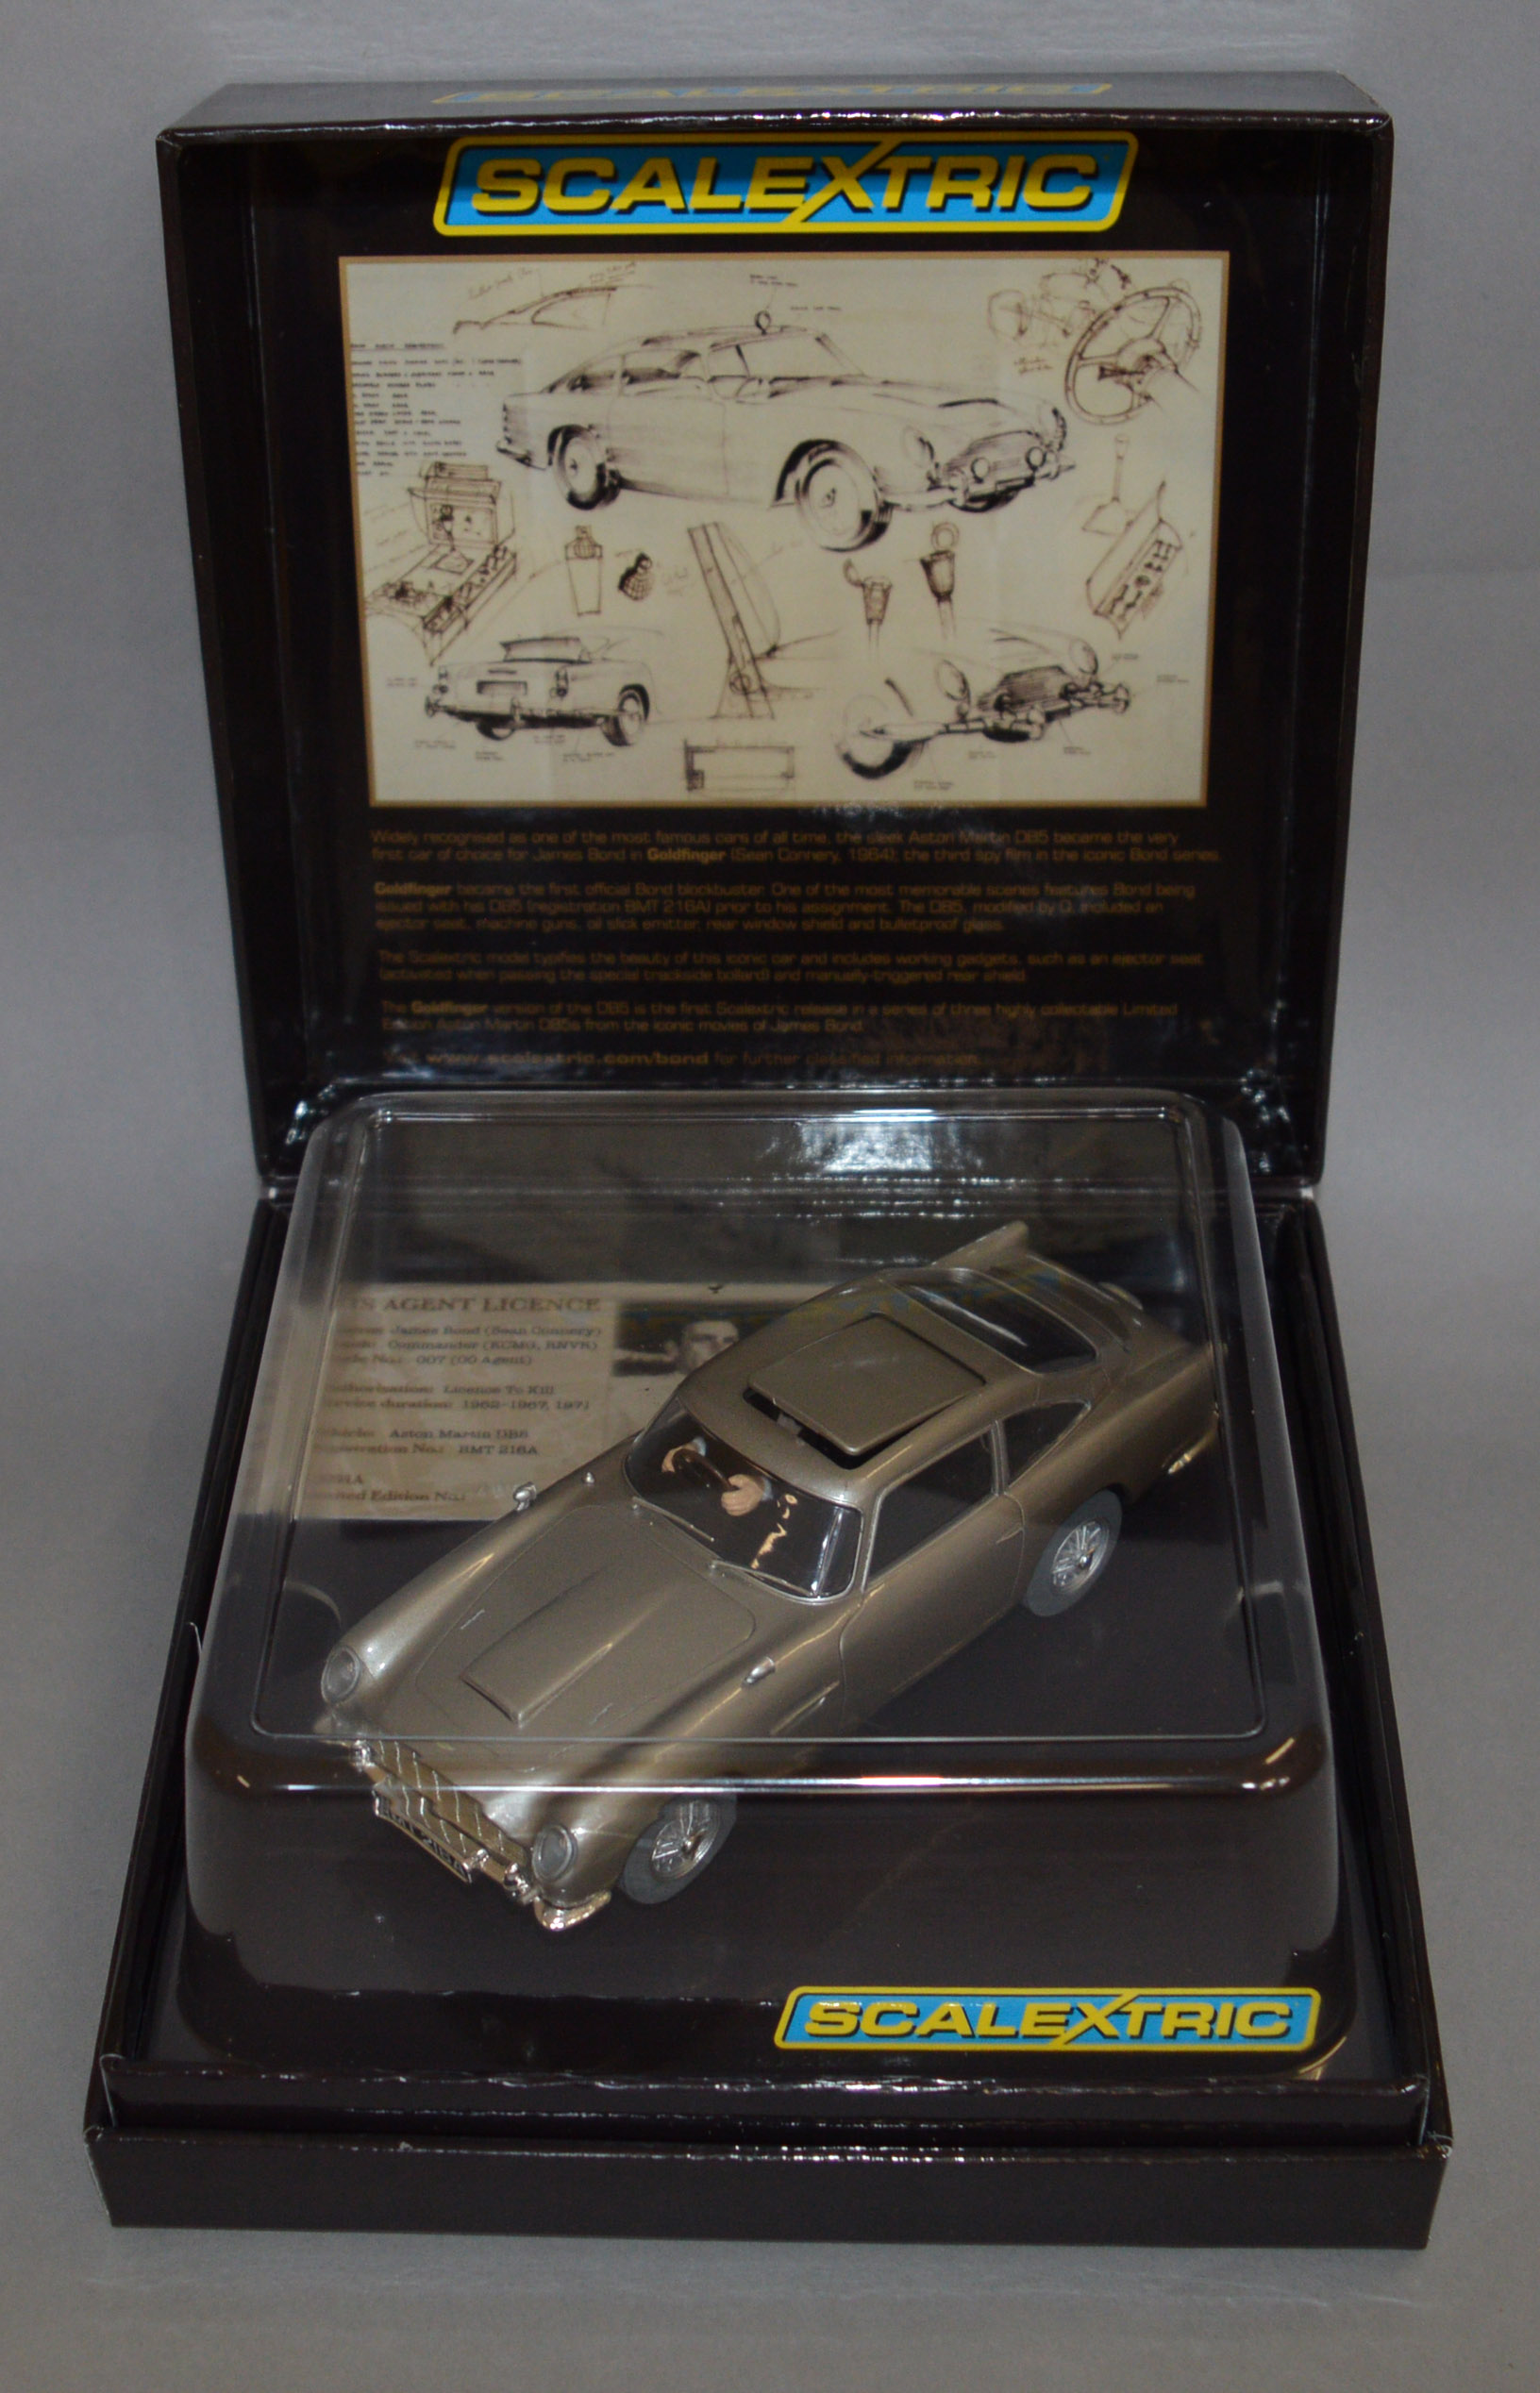 12 James Bond Scalextric diecast models, Goldfinger 007 Aston Martin DB5 contained in 1 trade box ( - Image 2 of 2